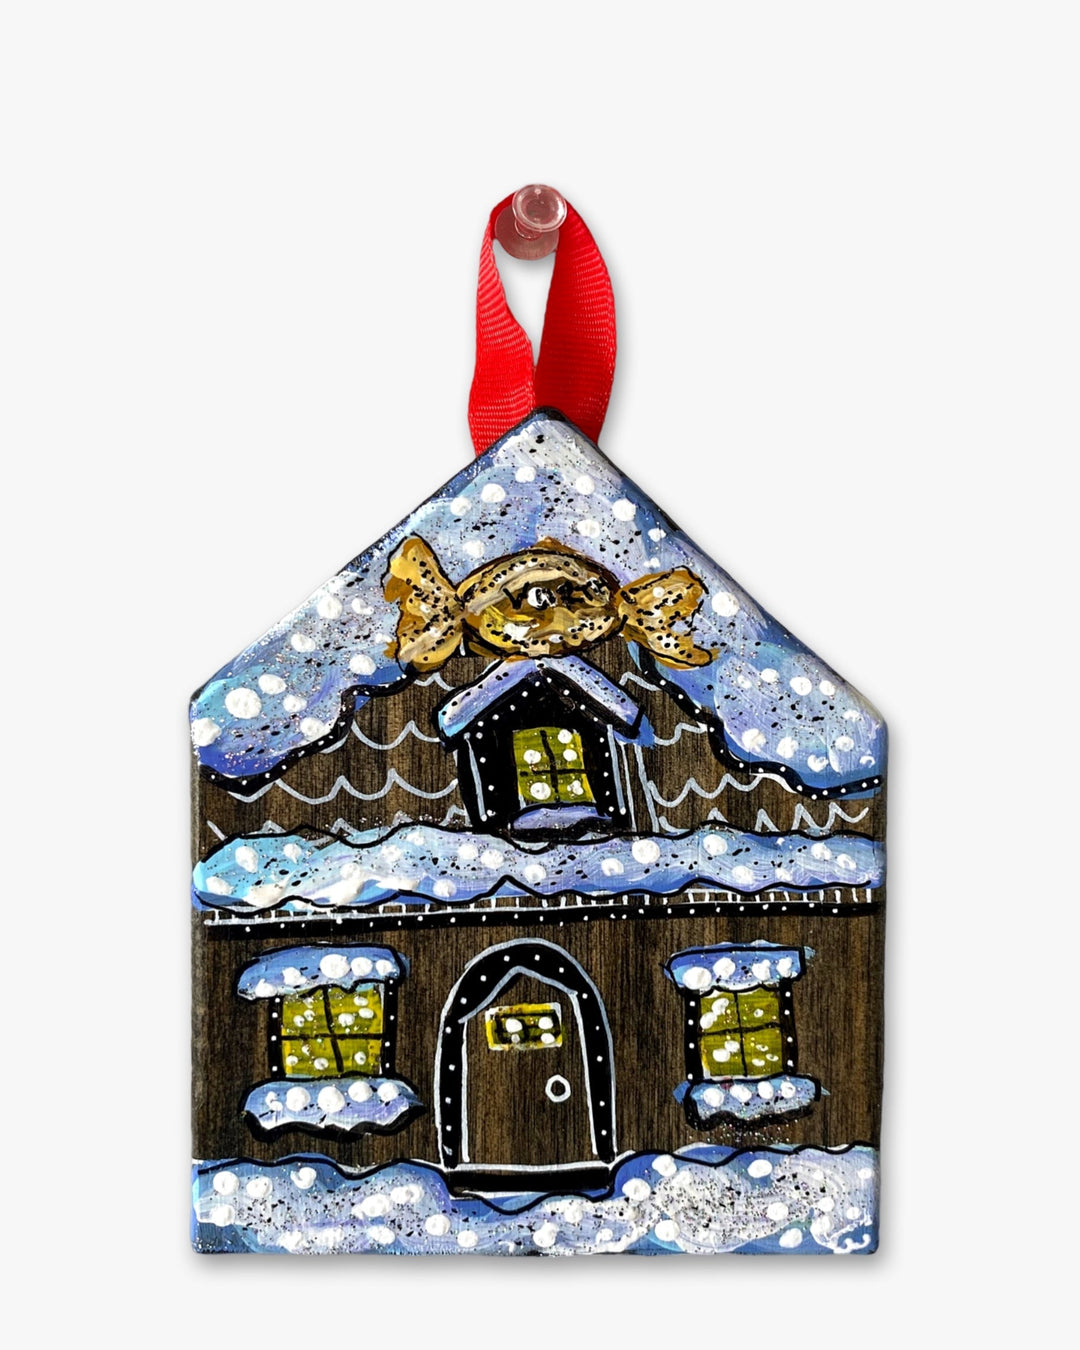 Grandma’s Candy Gingerbread Cottage - Hand Painted Ornament - Heather Freitas - fine art home deccor